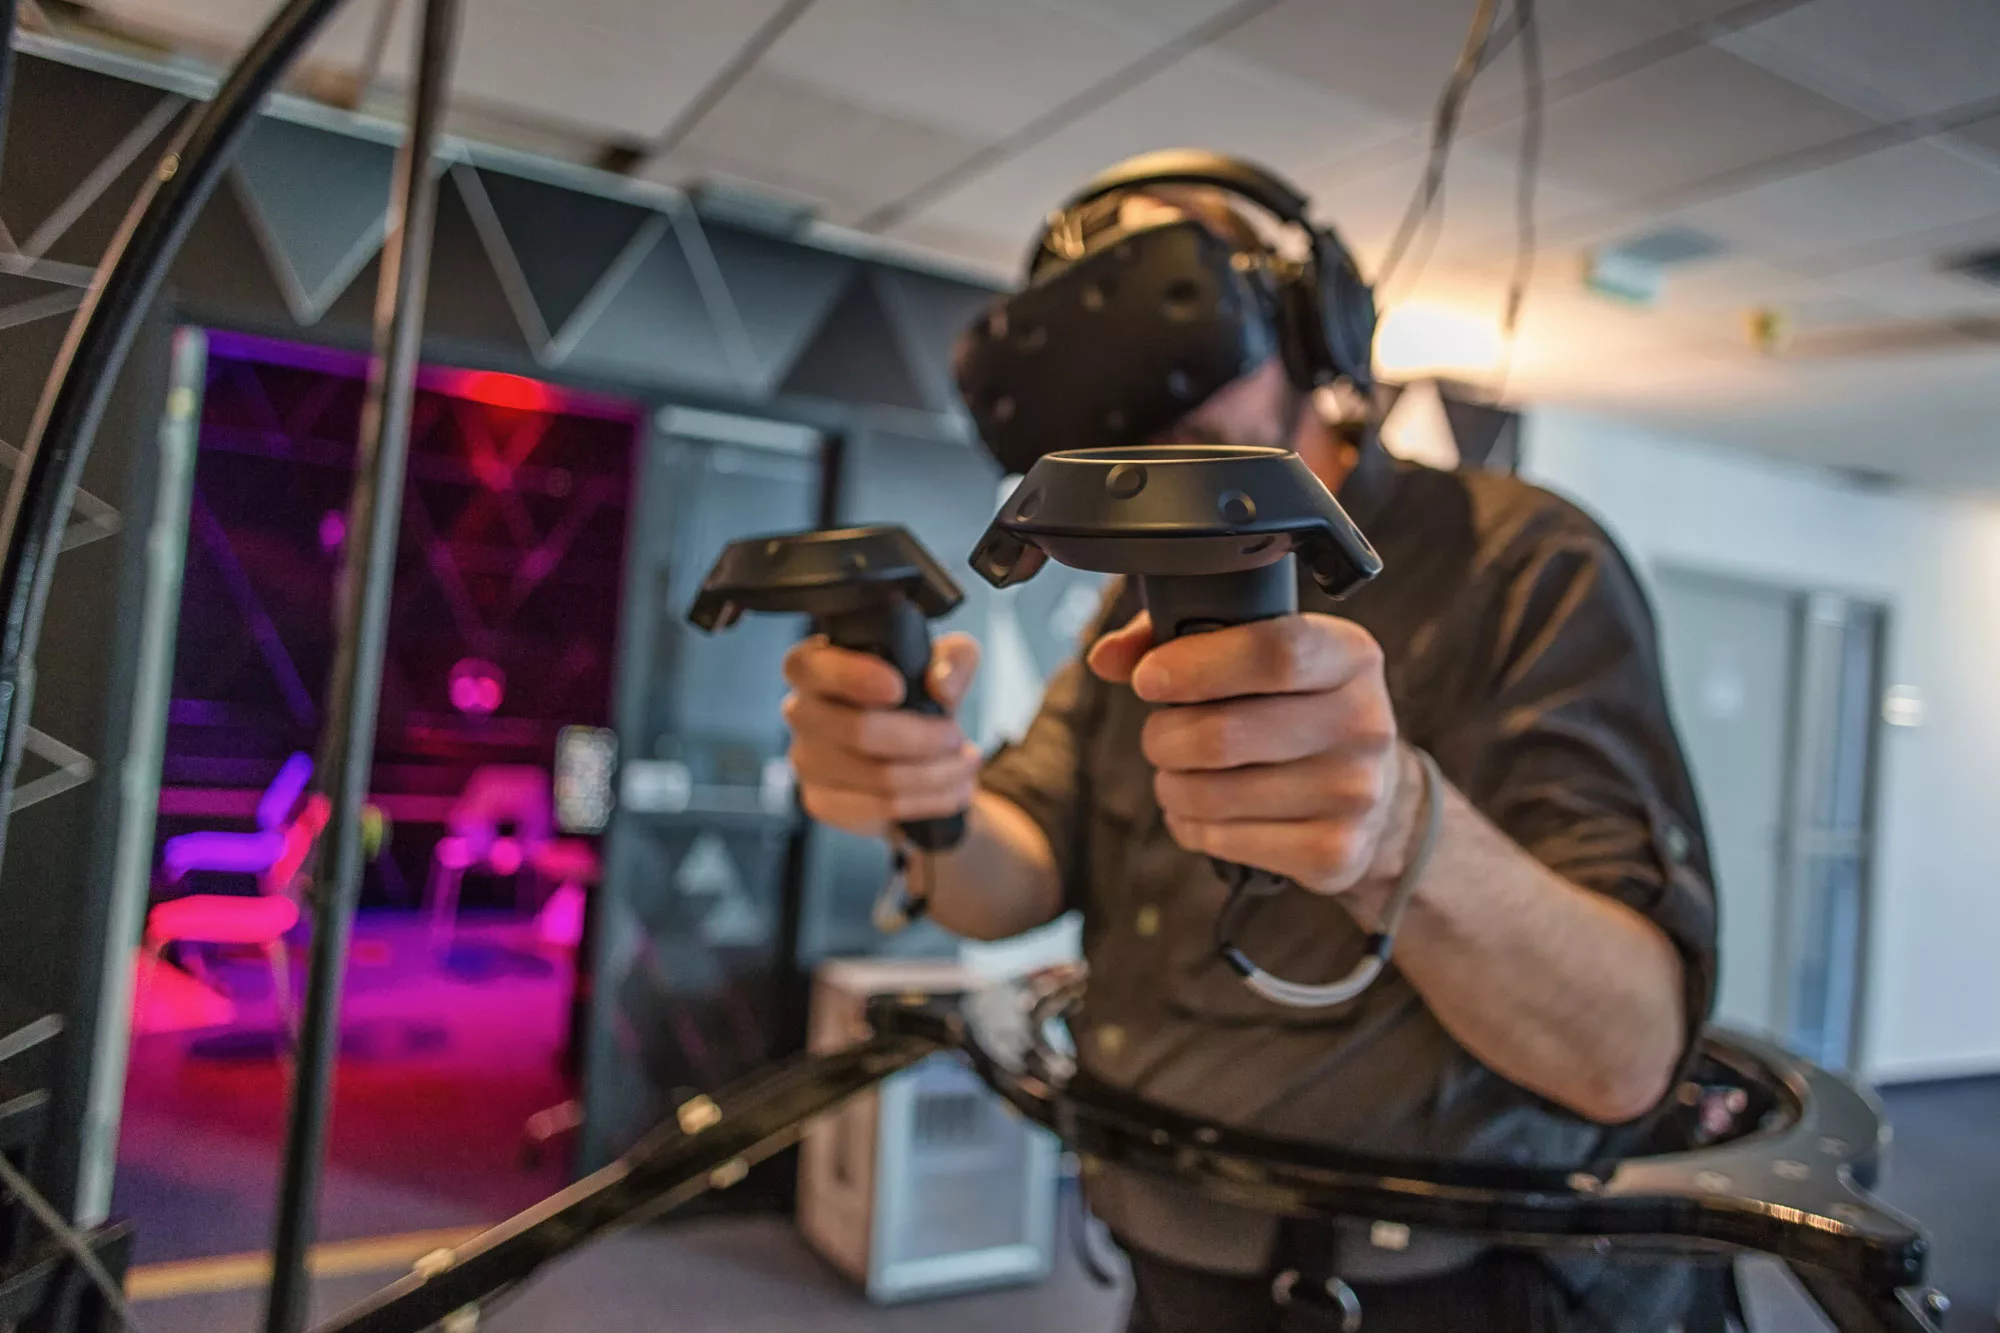 How VR is changing Prague's gaming scene | ROG - Republic of Gamers Global